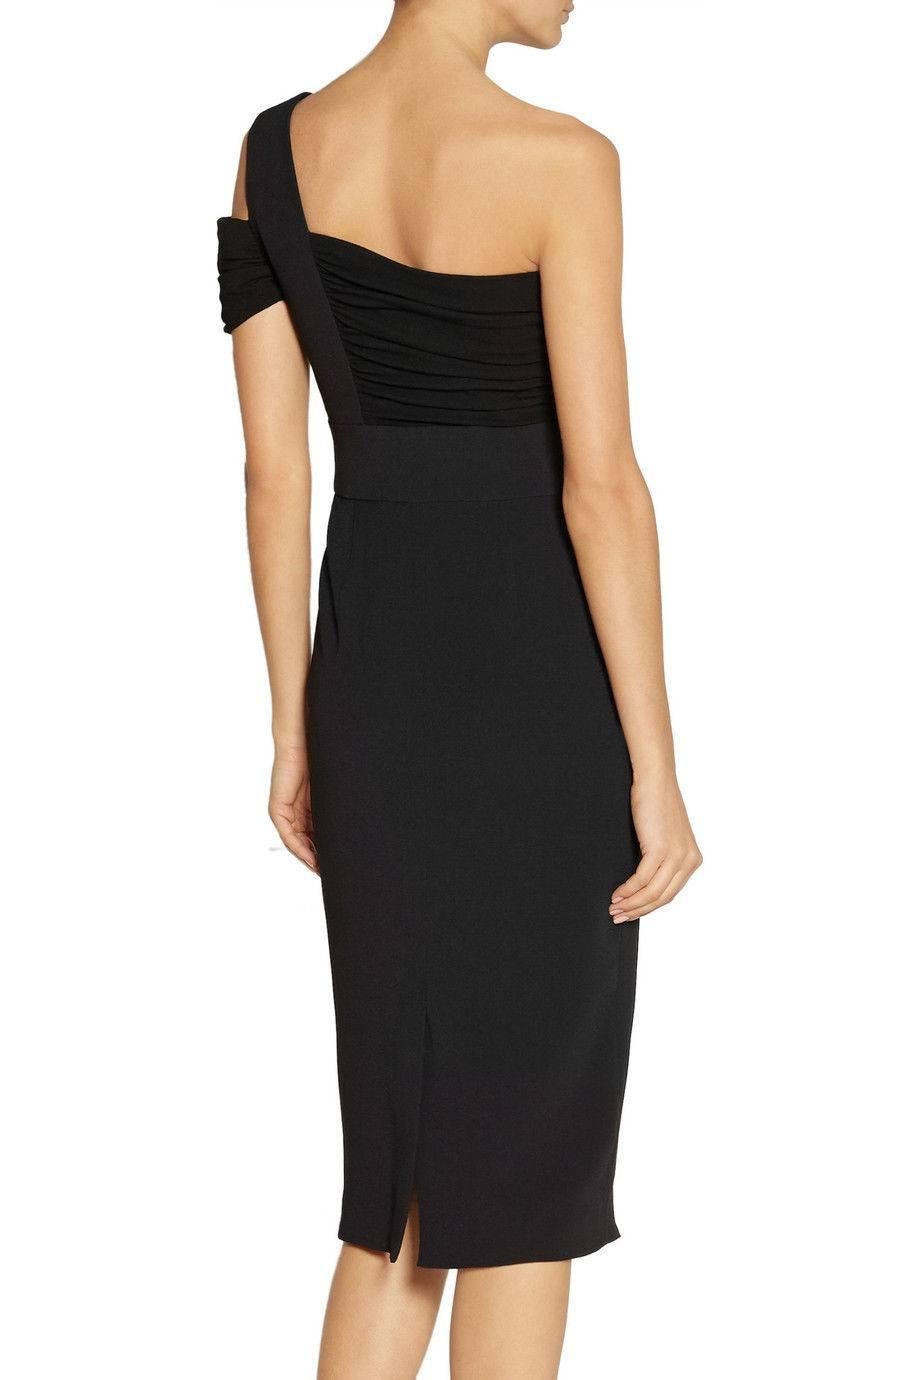 Proenza Schouler One-shoulder crepe and jersey dress 2 UK 6
Proenza Schouler black dress. Crepe. Ruched jersey bodice, back vent, fully lined. 
Concealed zip and hook fastening along side. 
74% acetate, 26% viscose. 
Fitted at the bust and waist,